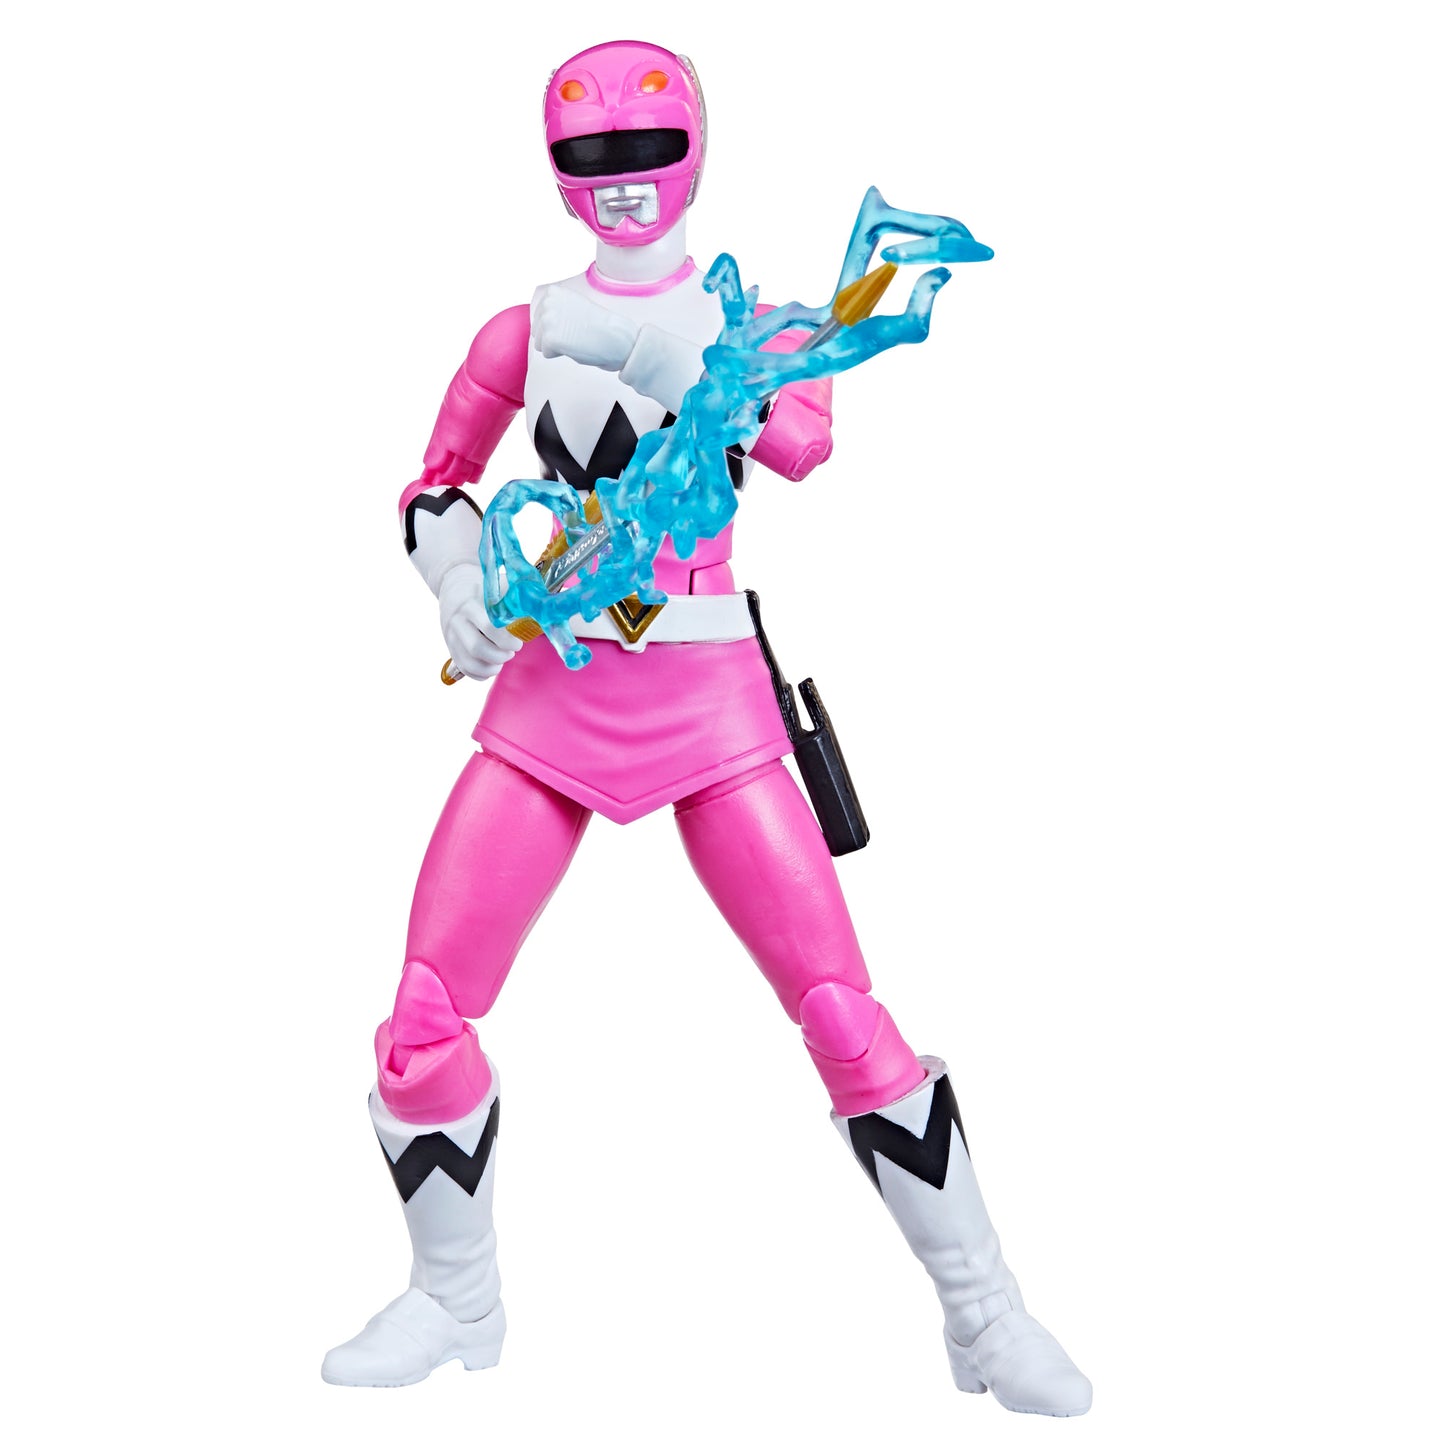 Power Rangers Lightning Collection Lost Galaxy Pink Ranger Figure Toy with mask and accessories - Heretoserveyou